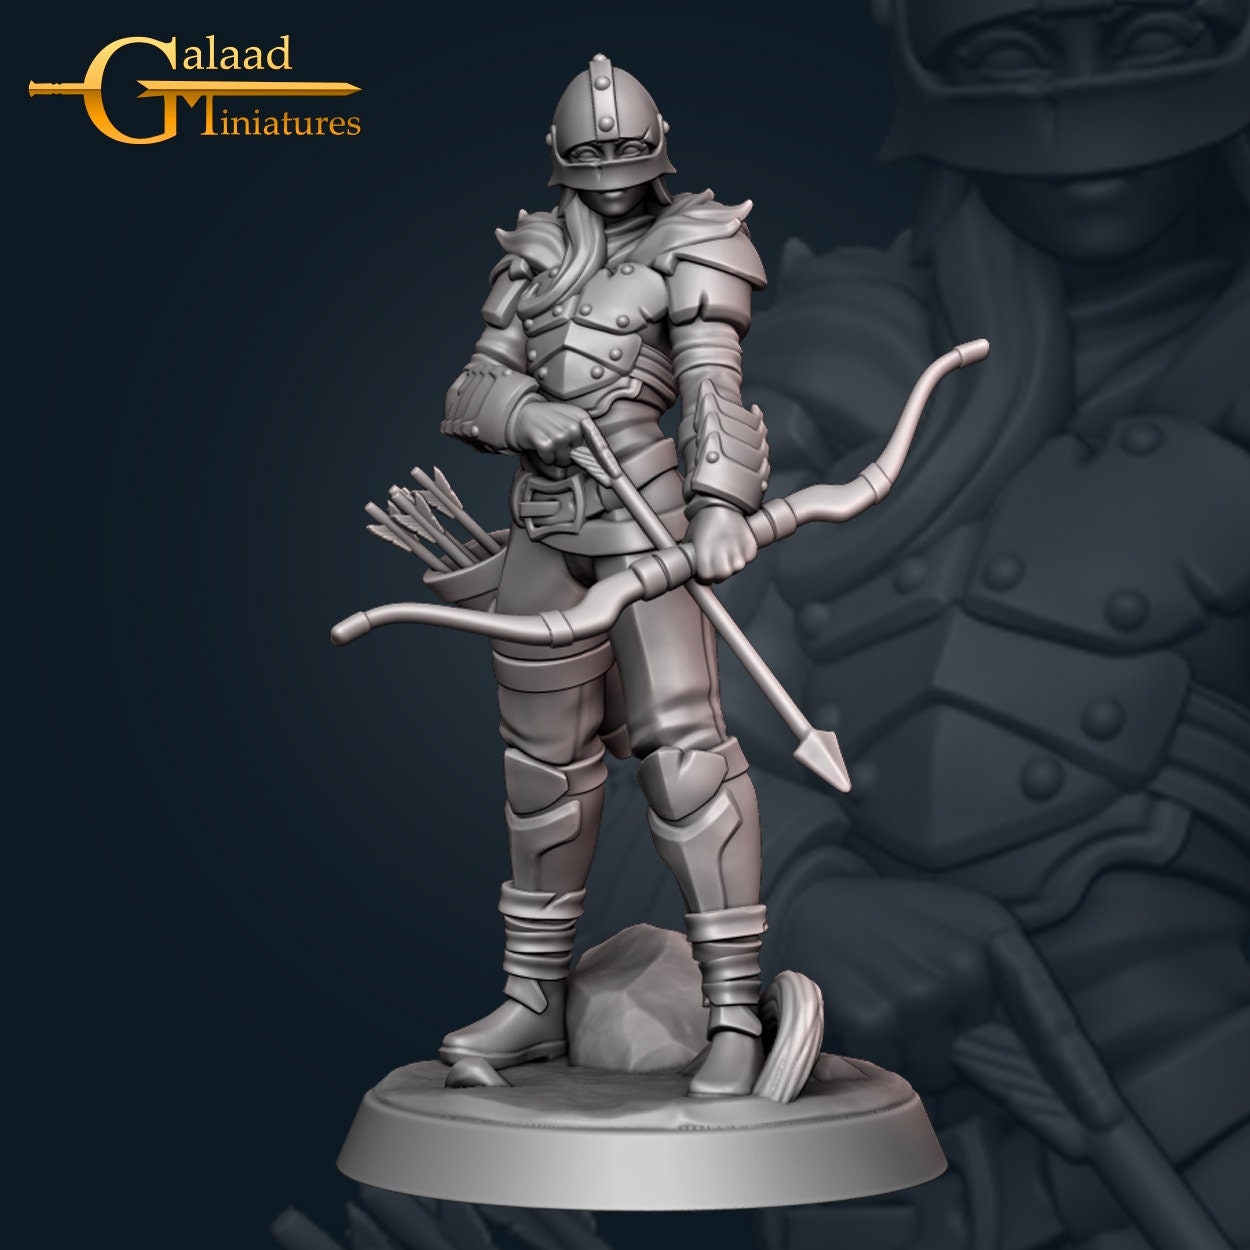 Female Human Fighter with Bow D&D miniature, by Galaad Miniatures // 3D Print on Demand / DnD / Pathfinder / RPG